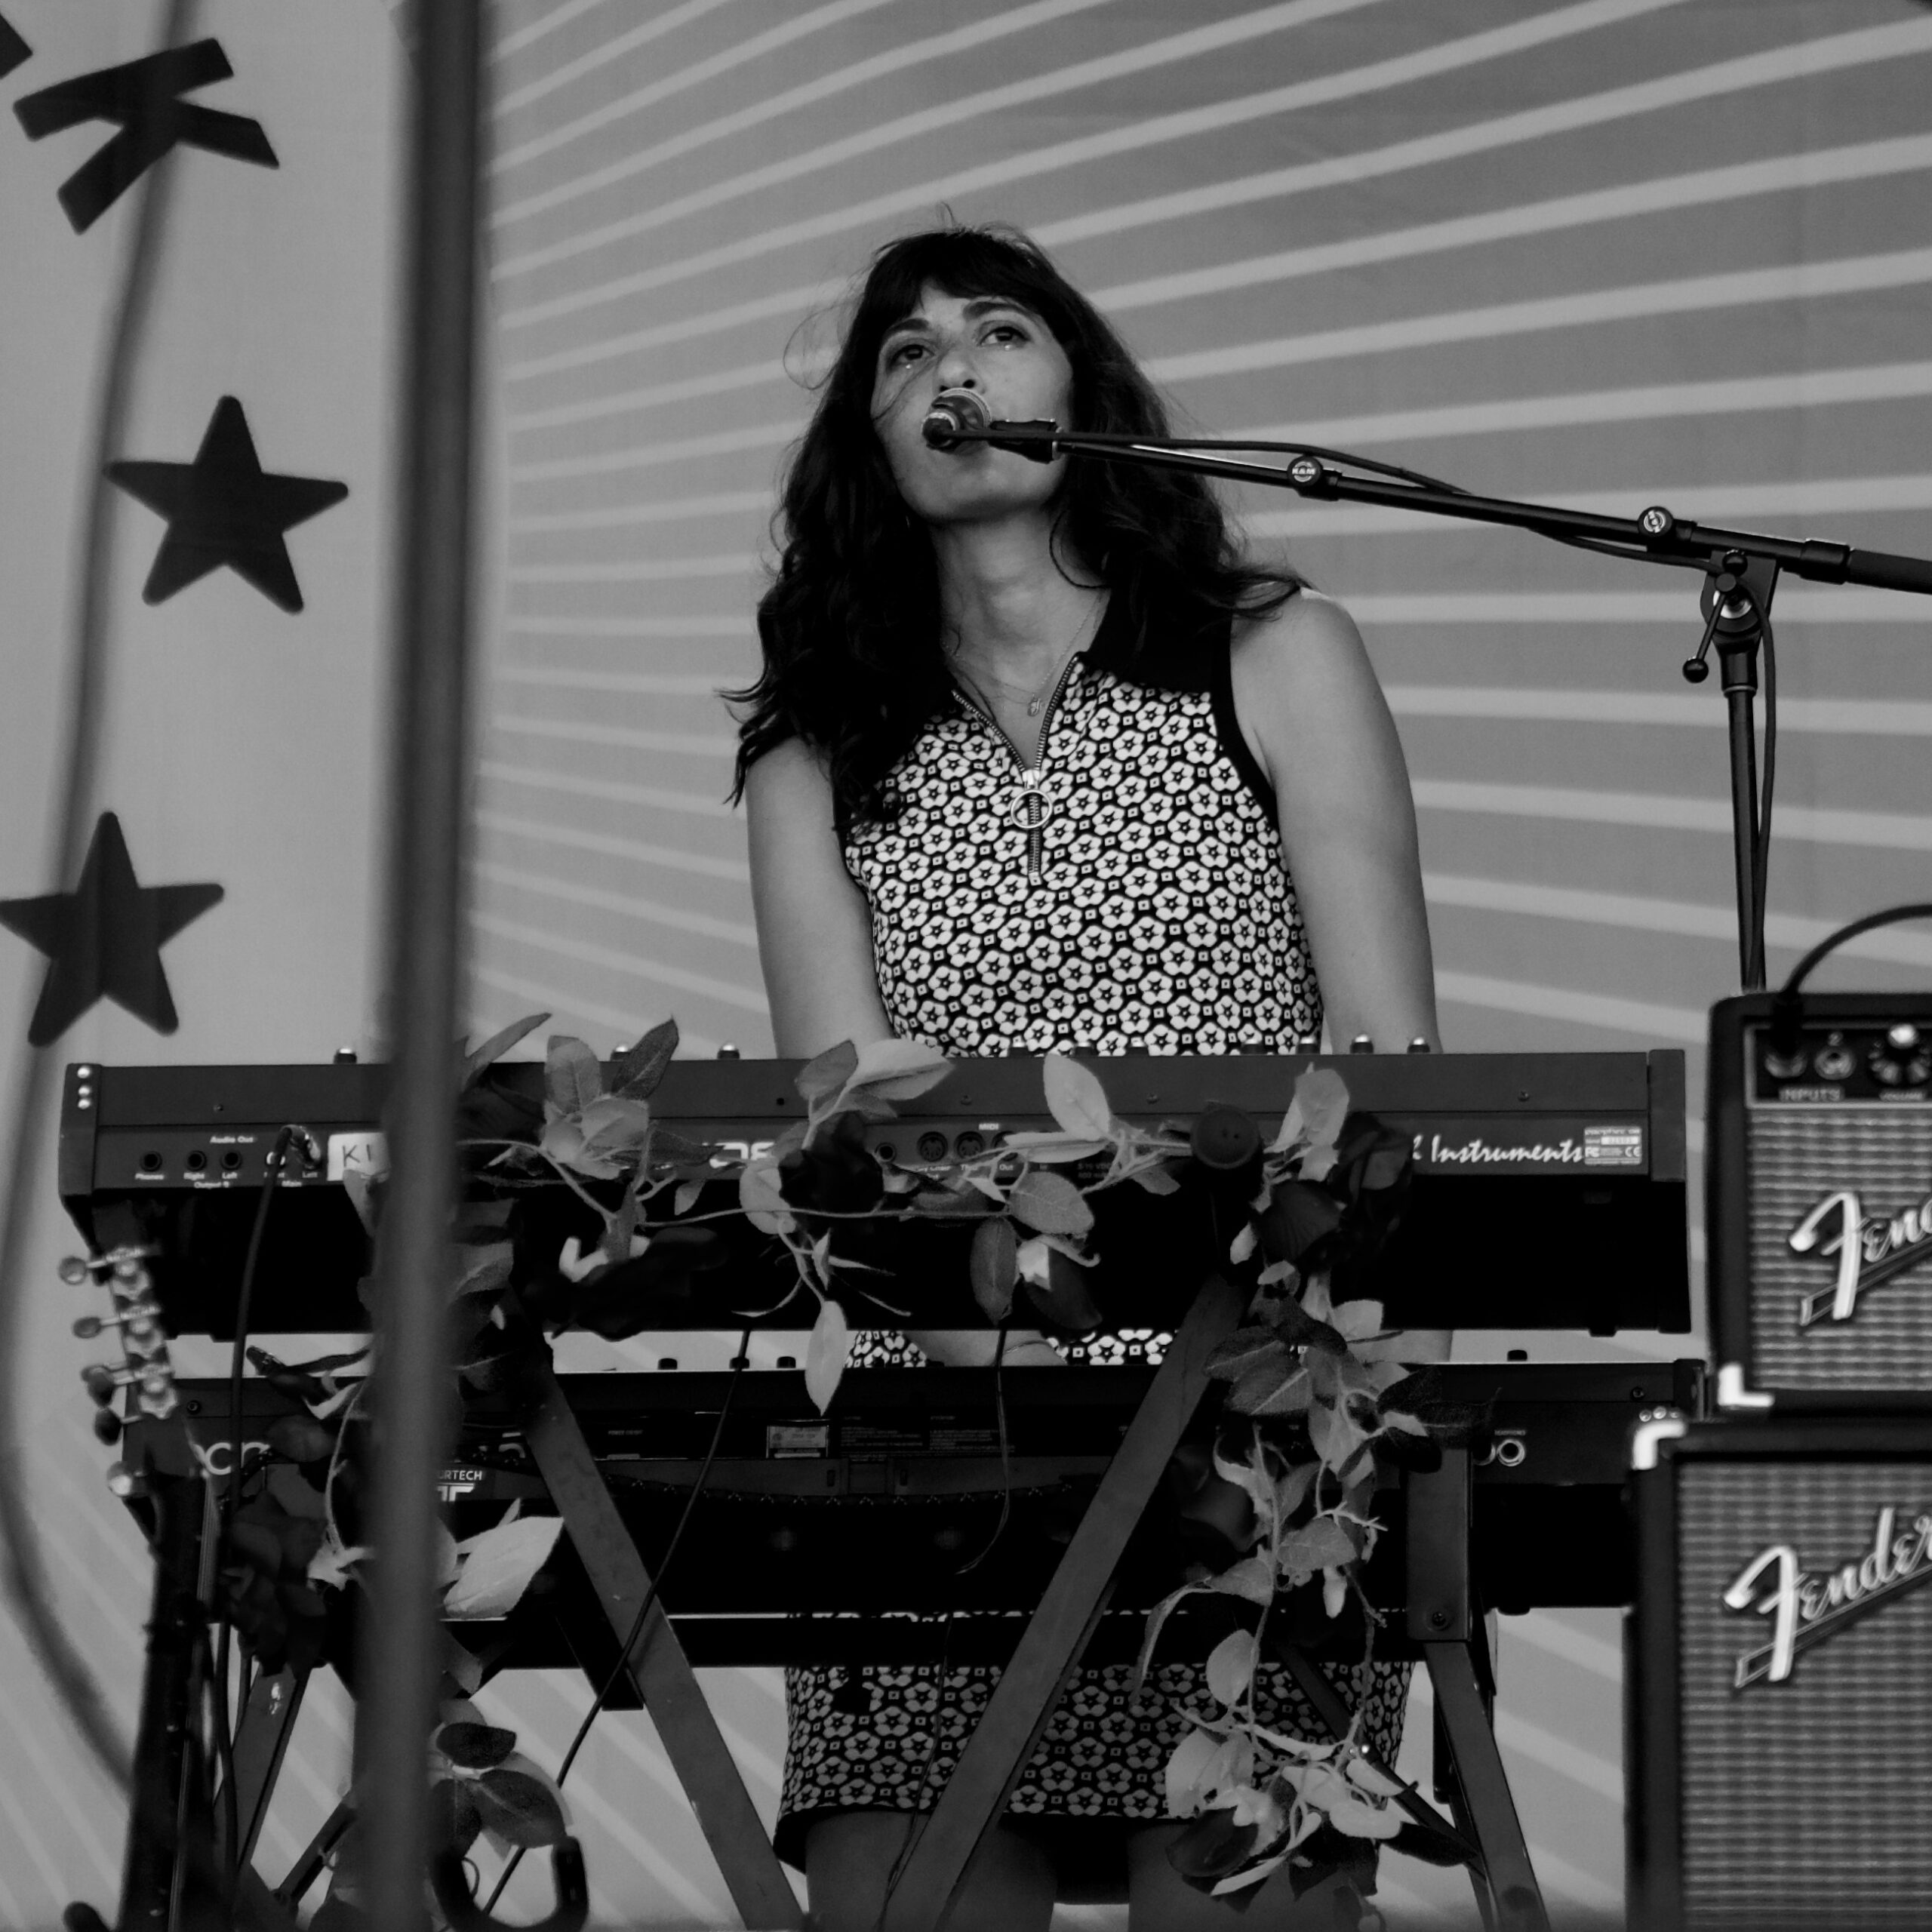 Sarah Goldstone plays the keyboard and sings with Lucy Dacus’ band at Newport Folk Festival in Newport, R.I. on July 23, 2022. (Maya Santow/WTBU)